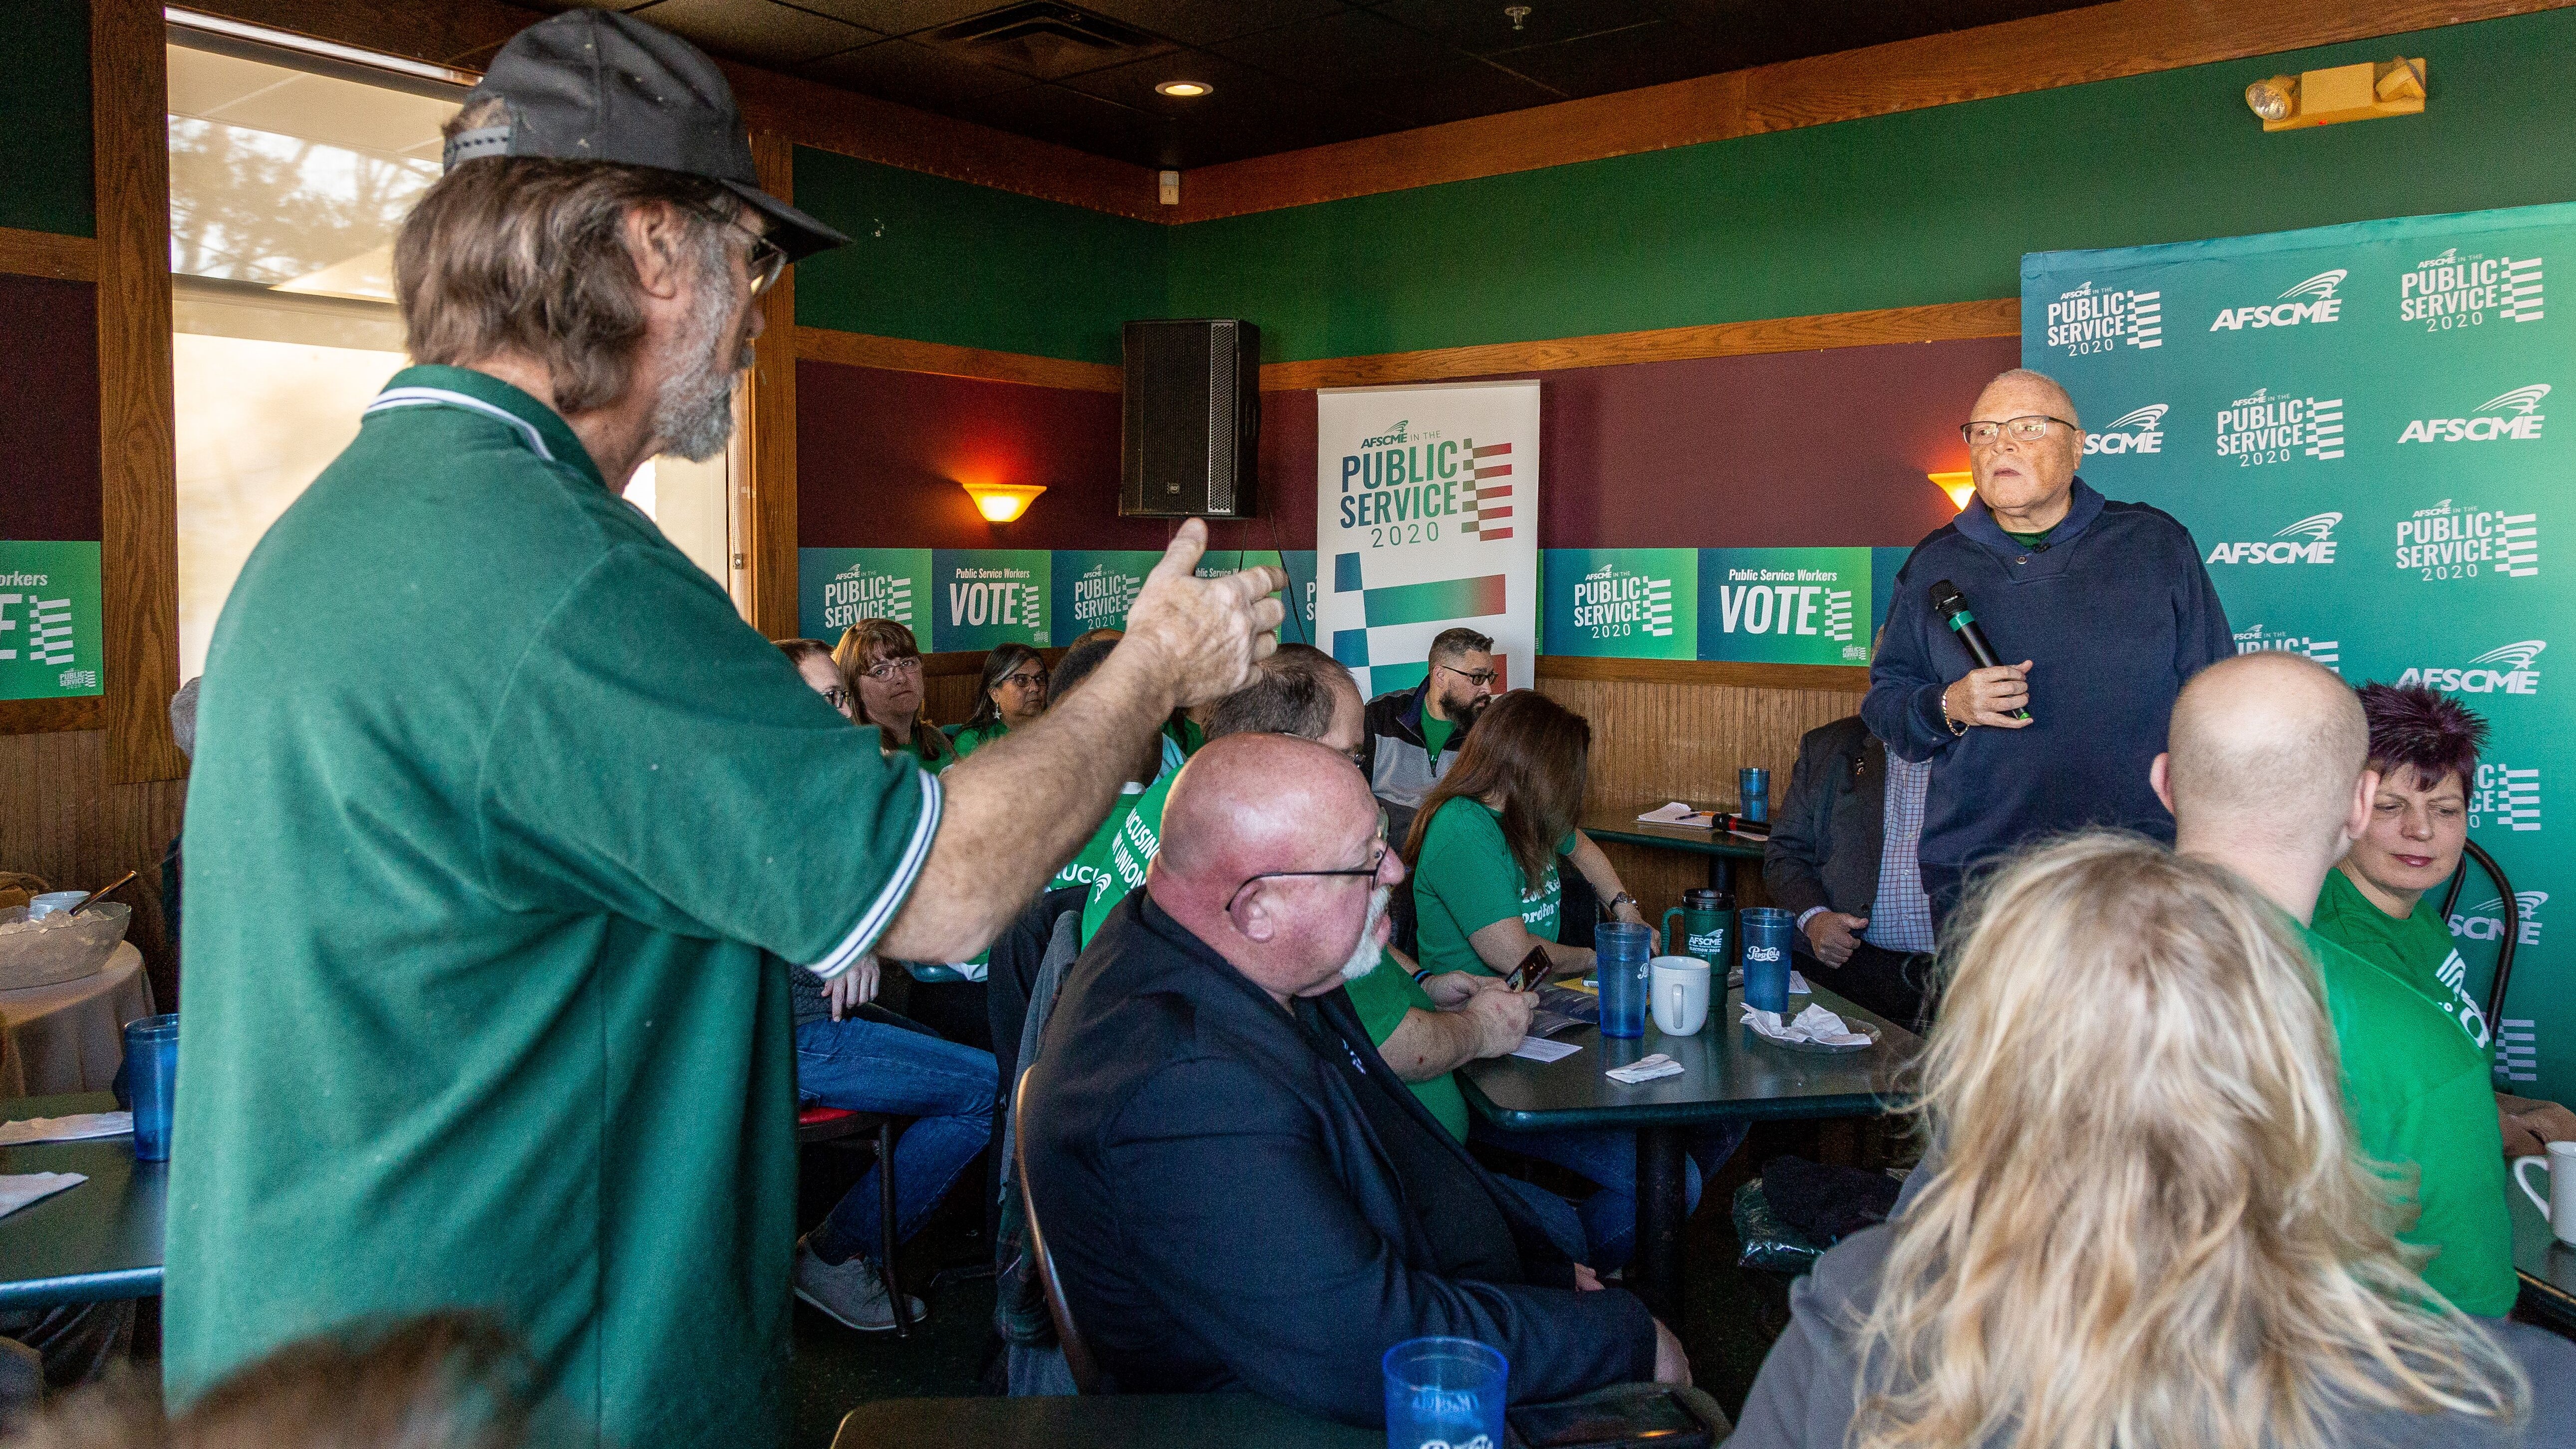 At AFSCME’s Iowa Coffee Caucus, Candidates Champion Public Services and Unions